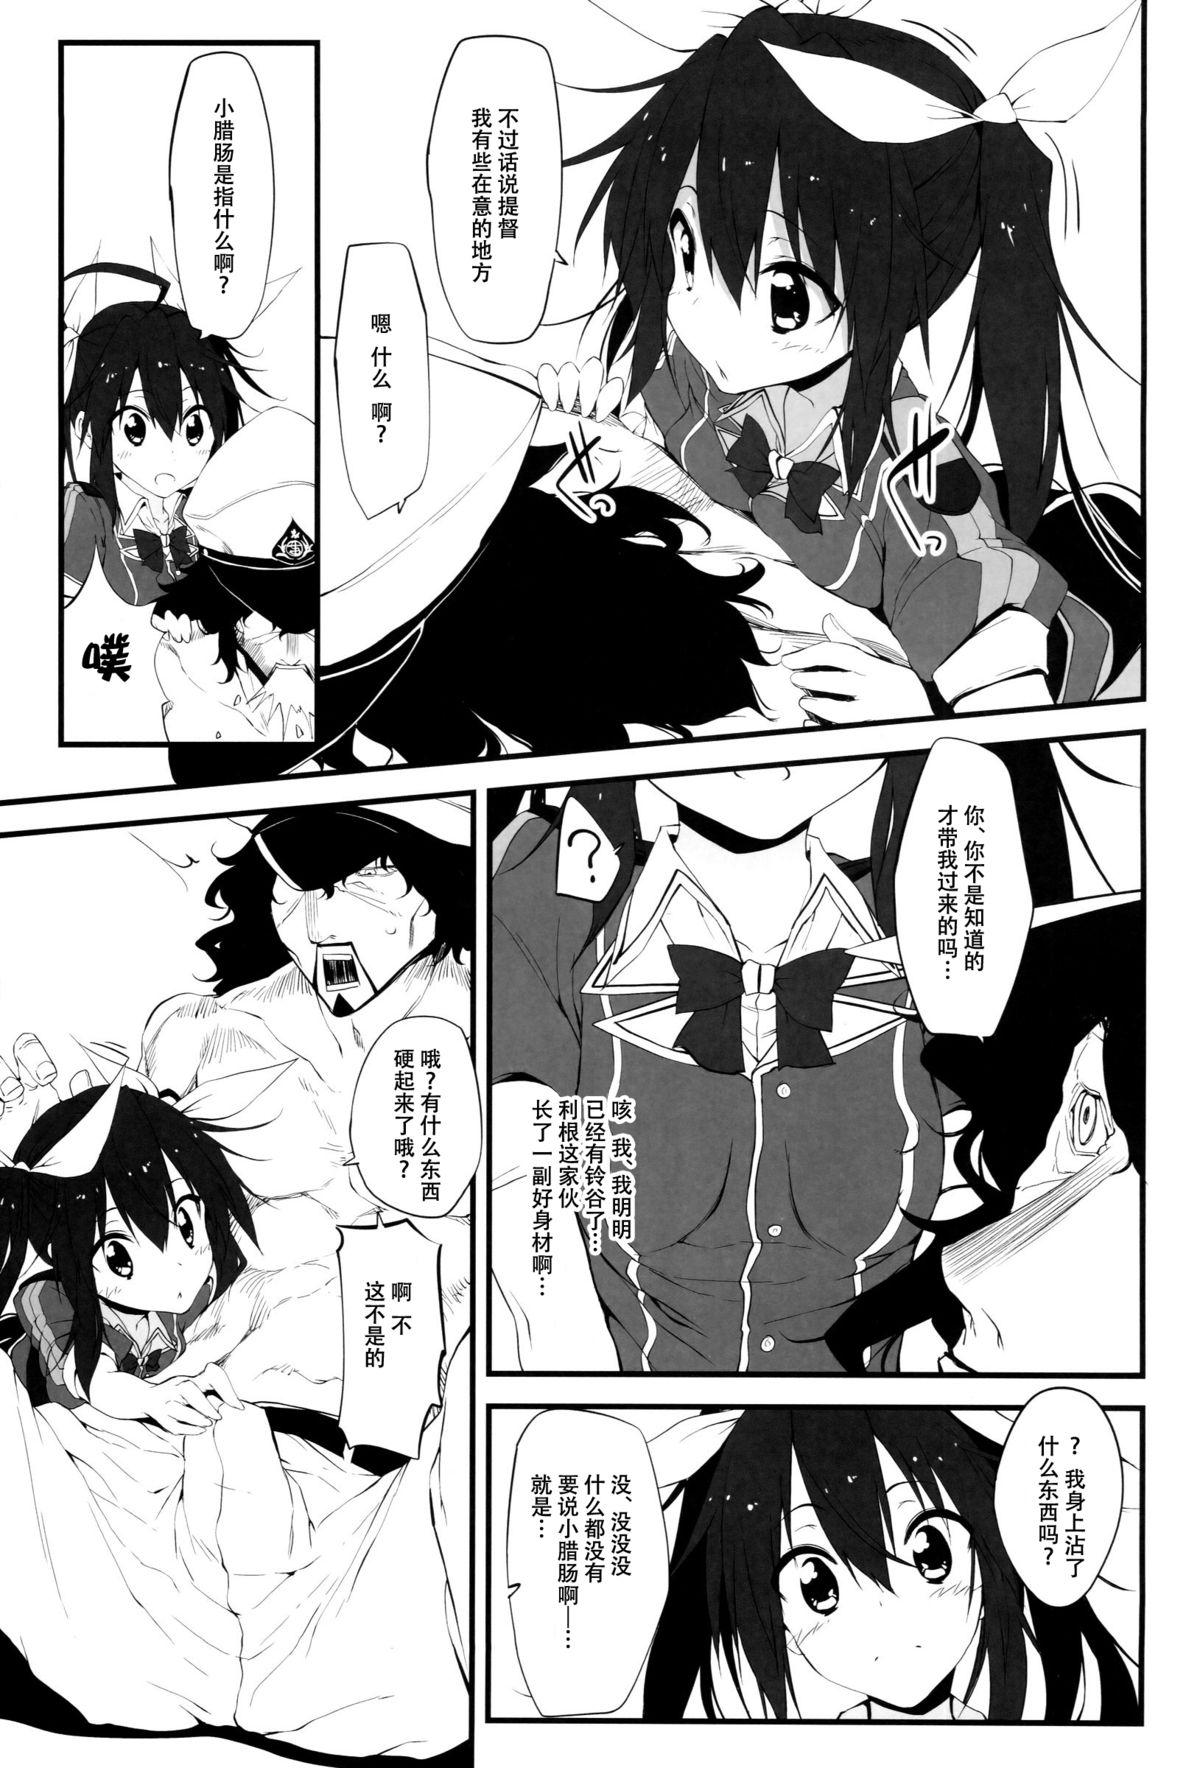 Extreme Marked-girls Vol. 2 - Kantai collection Juggs - Page 7